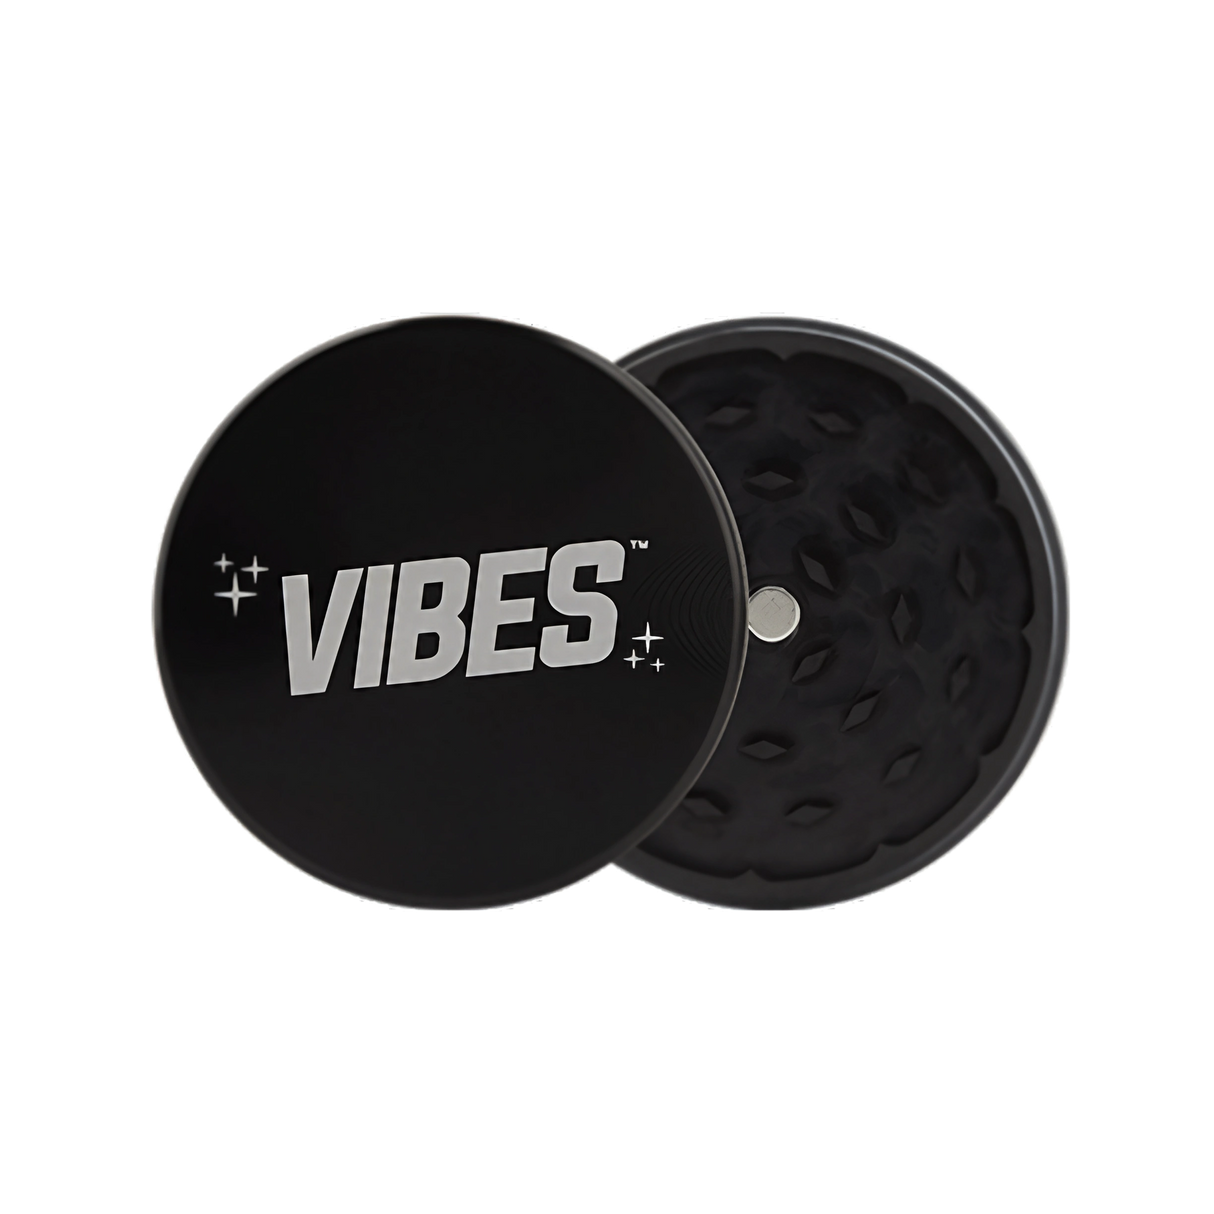 Vibes 2-Piece Aluminum Grinder in Black - 2.5" Compact Design for Dry Herbs, Top View